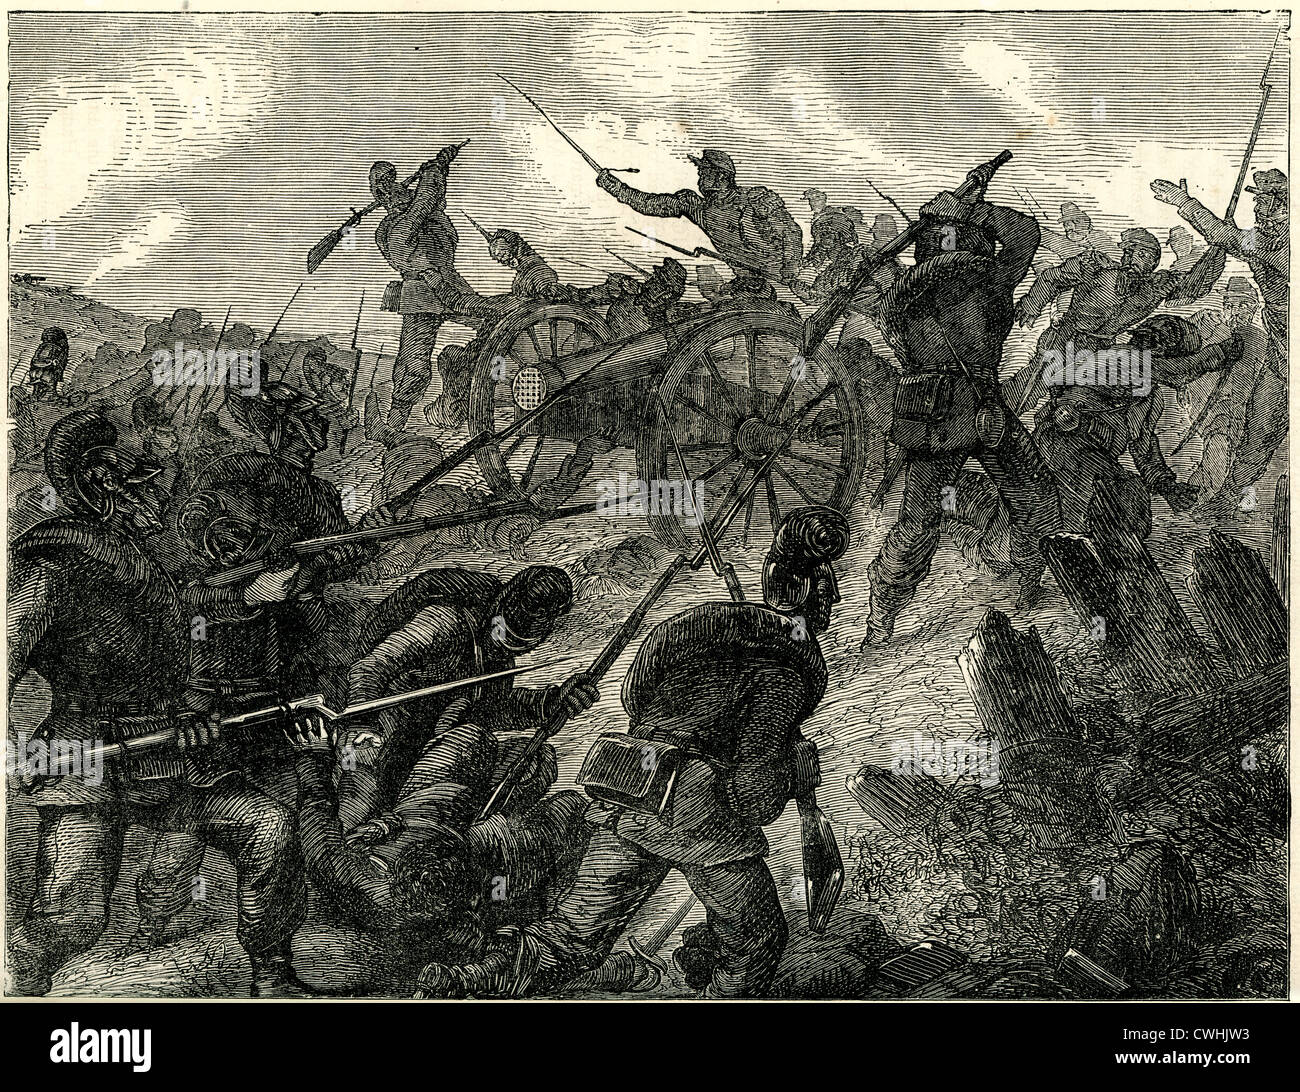 Capture of mitrailleuses by the Bavarians at the Battle of Worth in 1870, during the Franco Prussian War Stock Photo